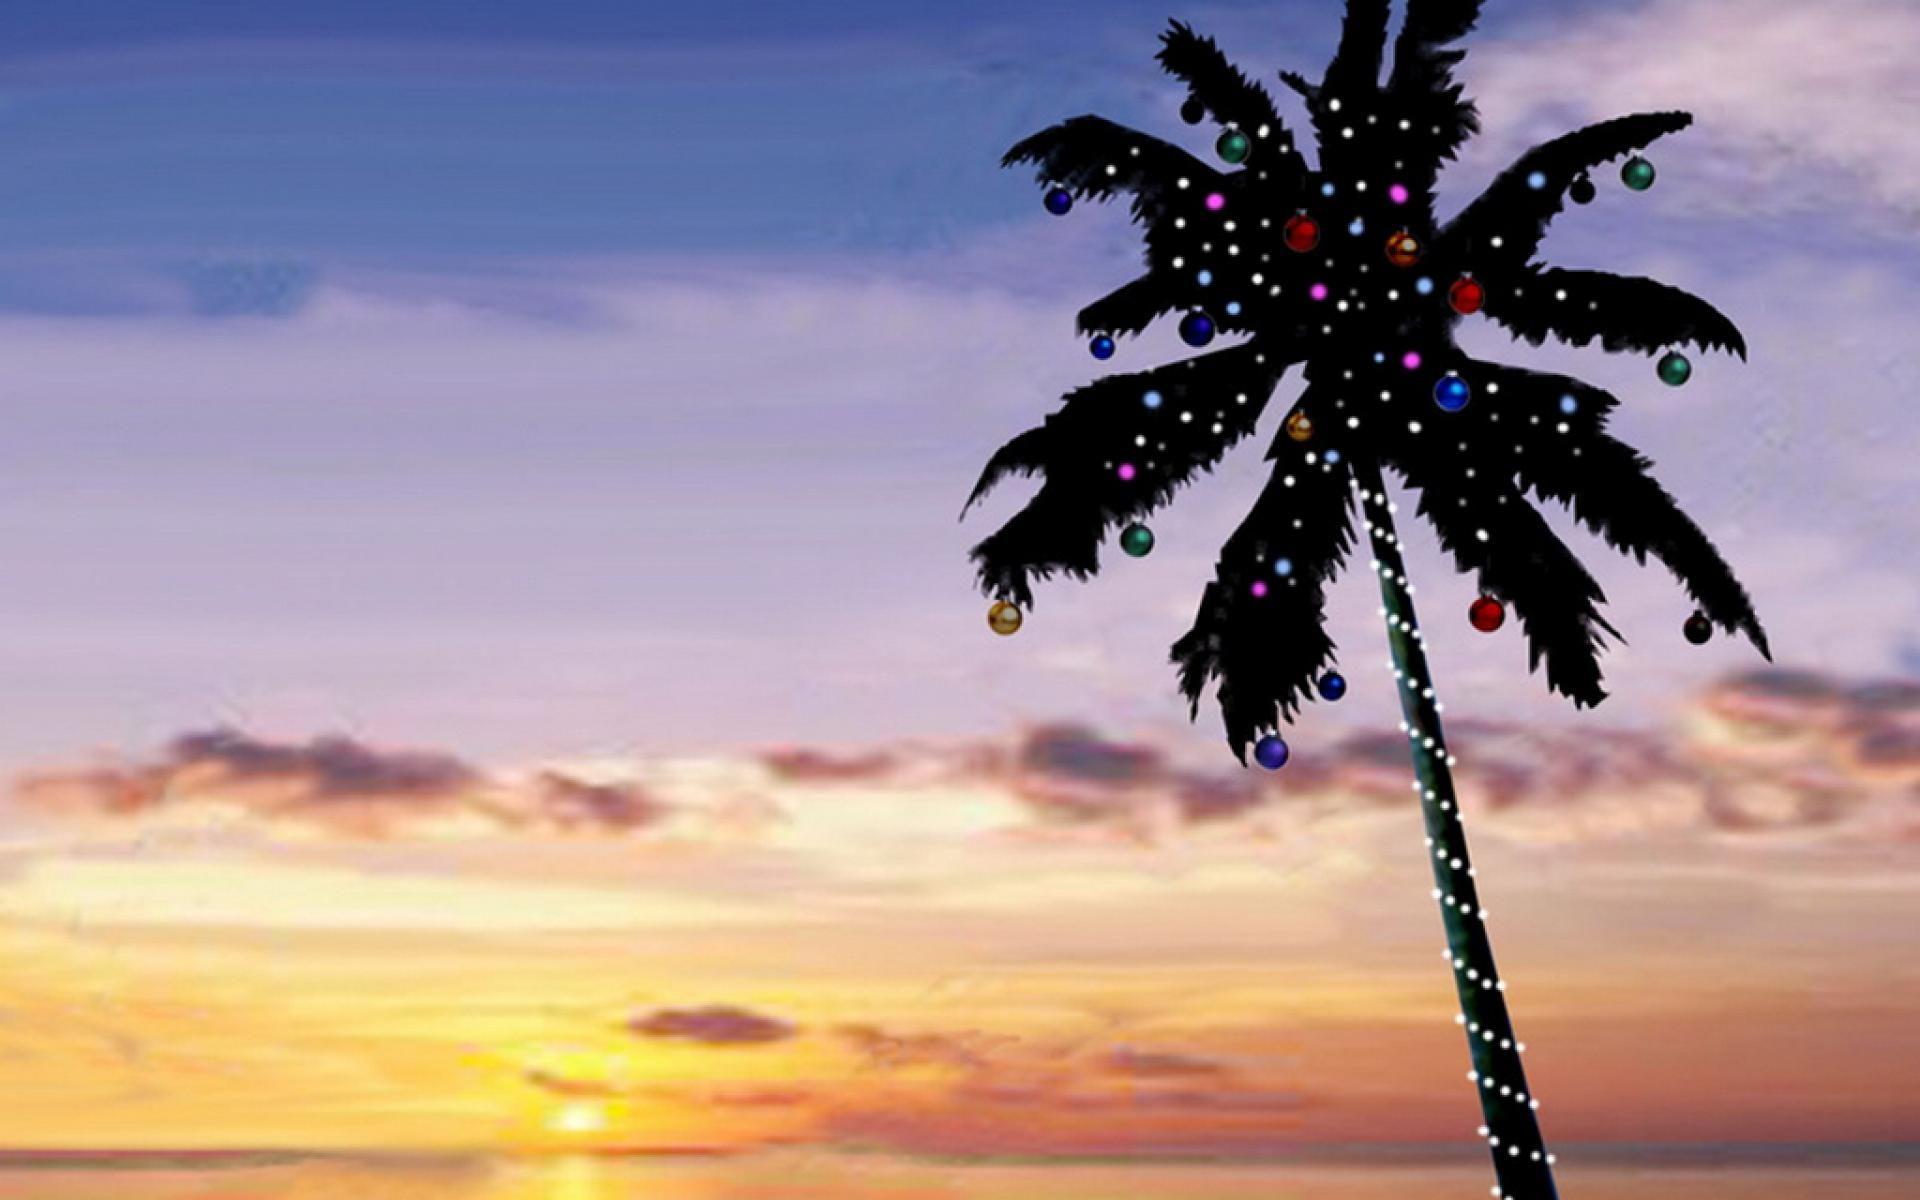 Tropical Christmas Themes. You are viewing the Christmas